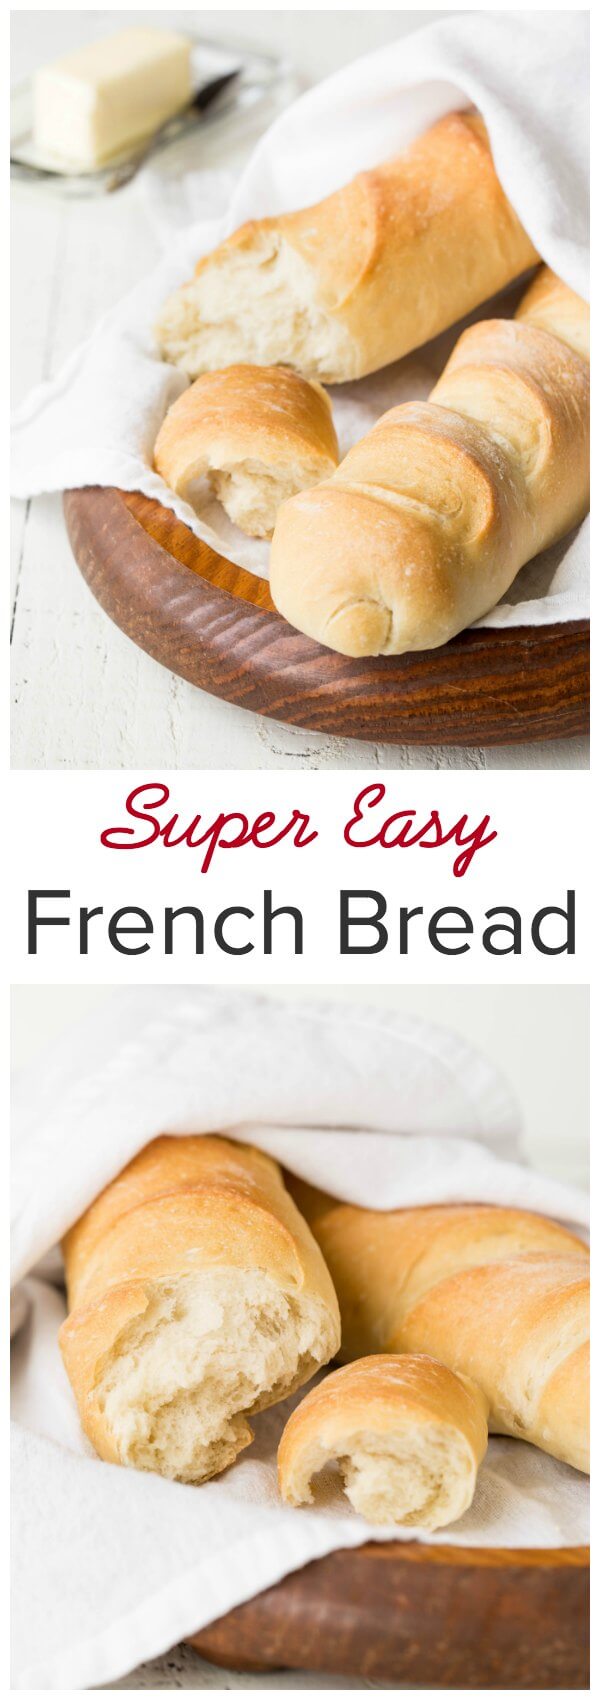 That amazing smell of freshly baked bread alone will make you want to bake this easy french bread over and over again. Especially considering how easy it is to make this bread from scratch.